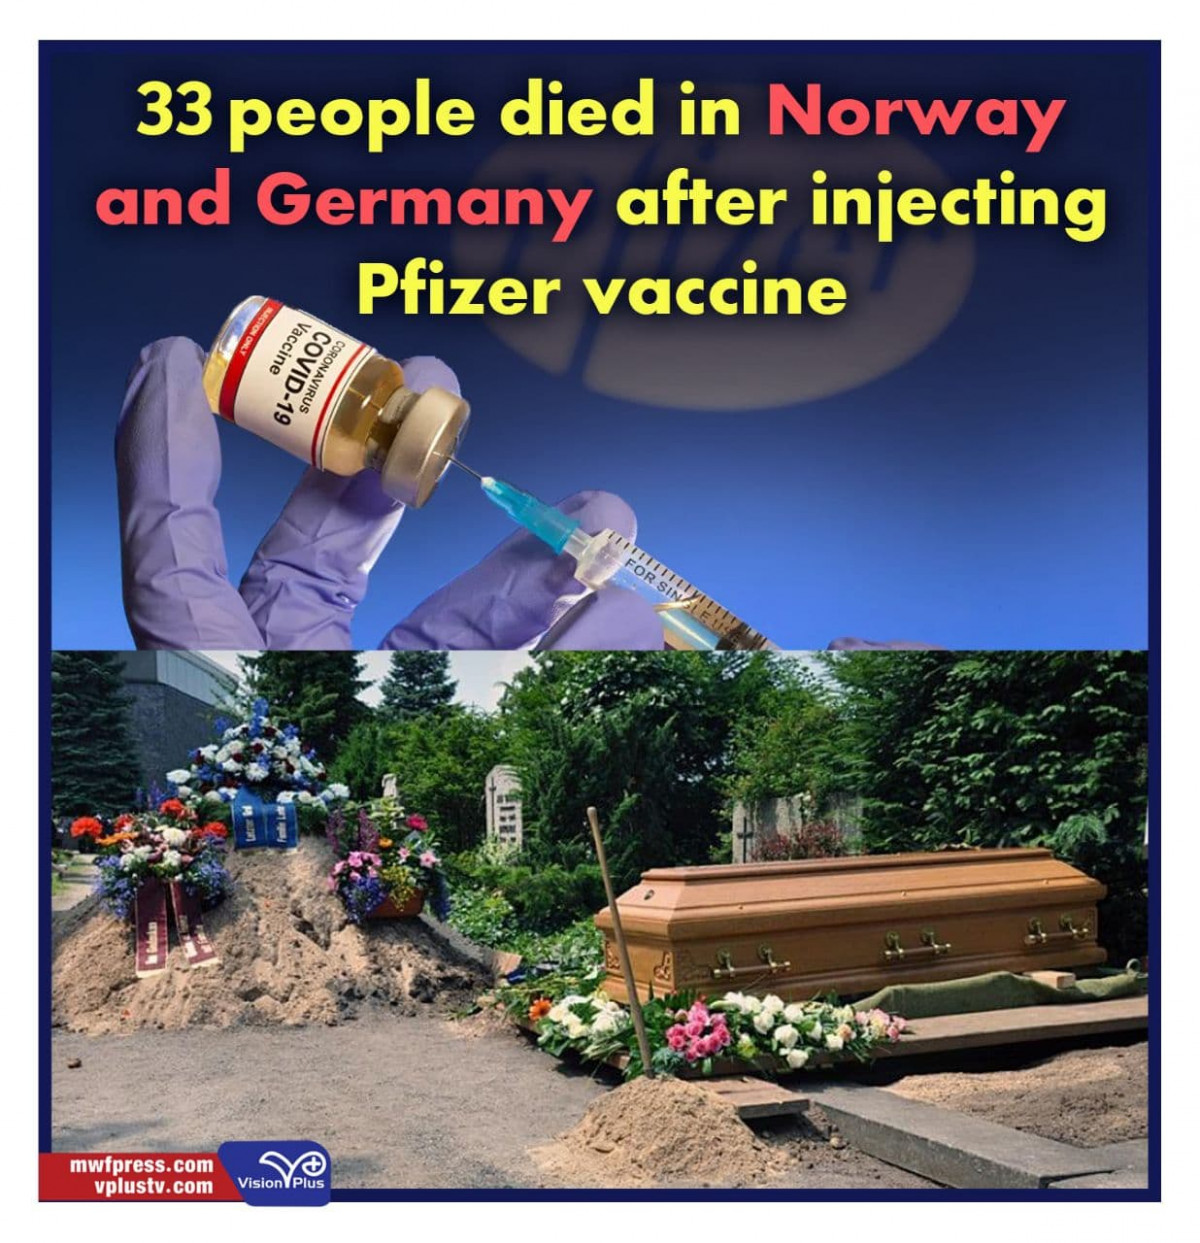 33 people died in Norway and Germany after injecting Pfizer vaccine